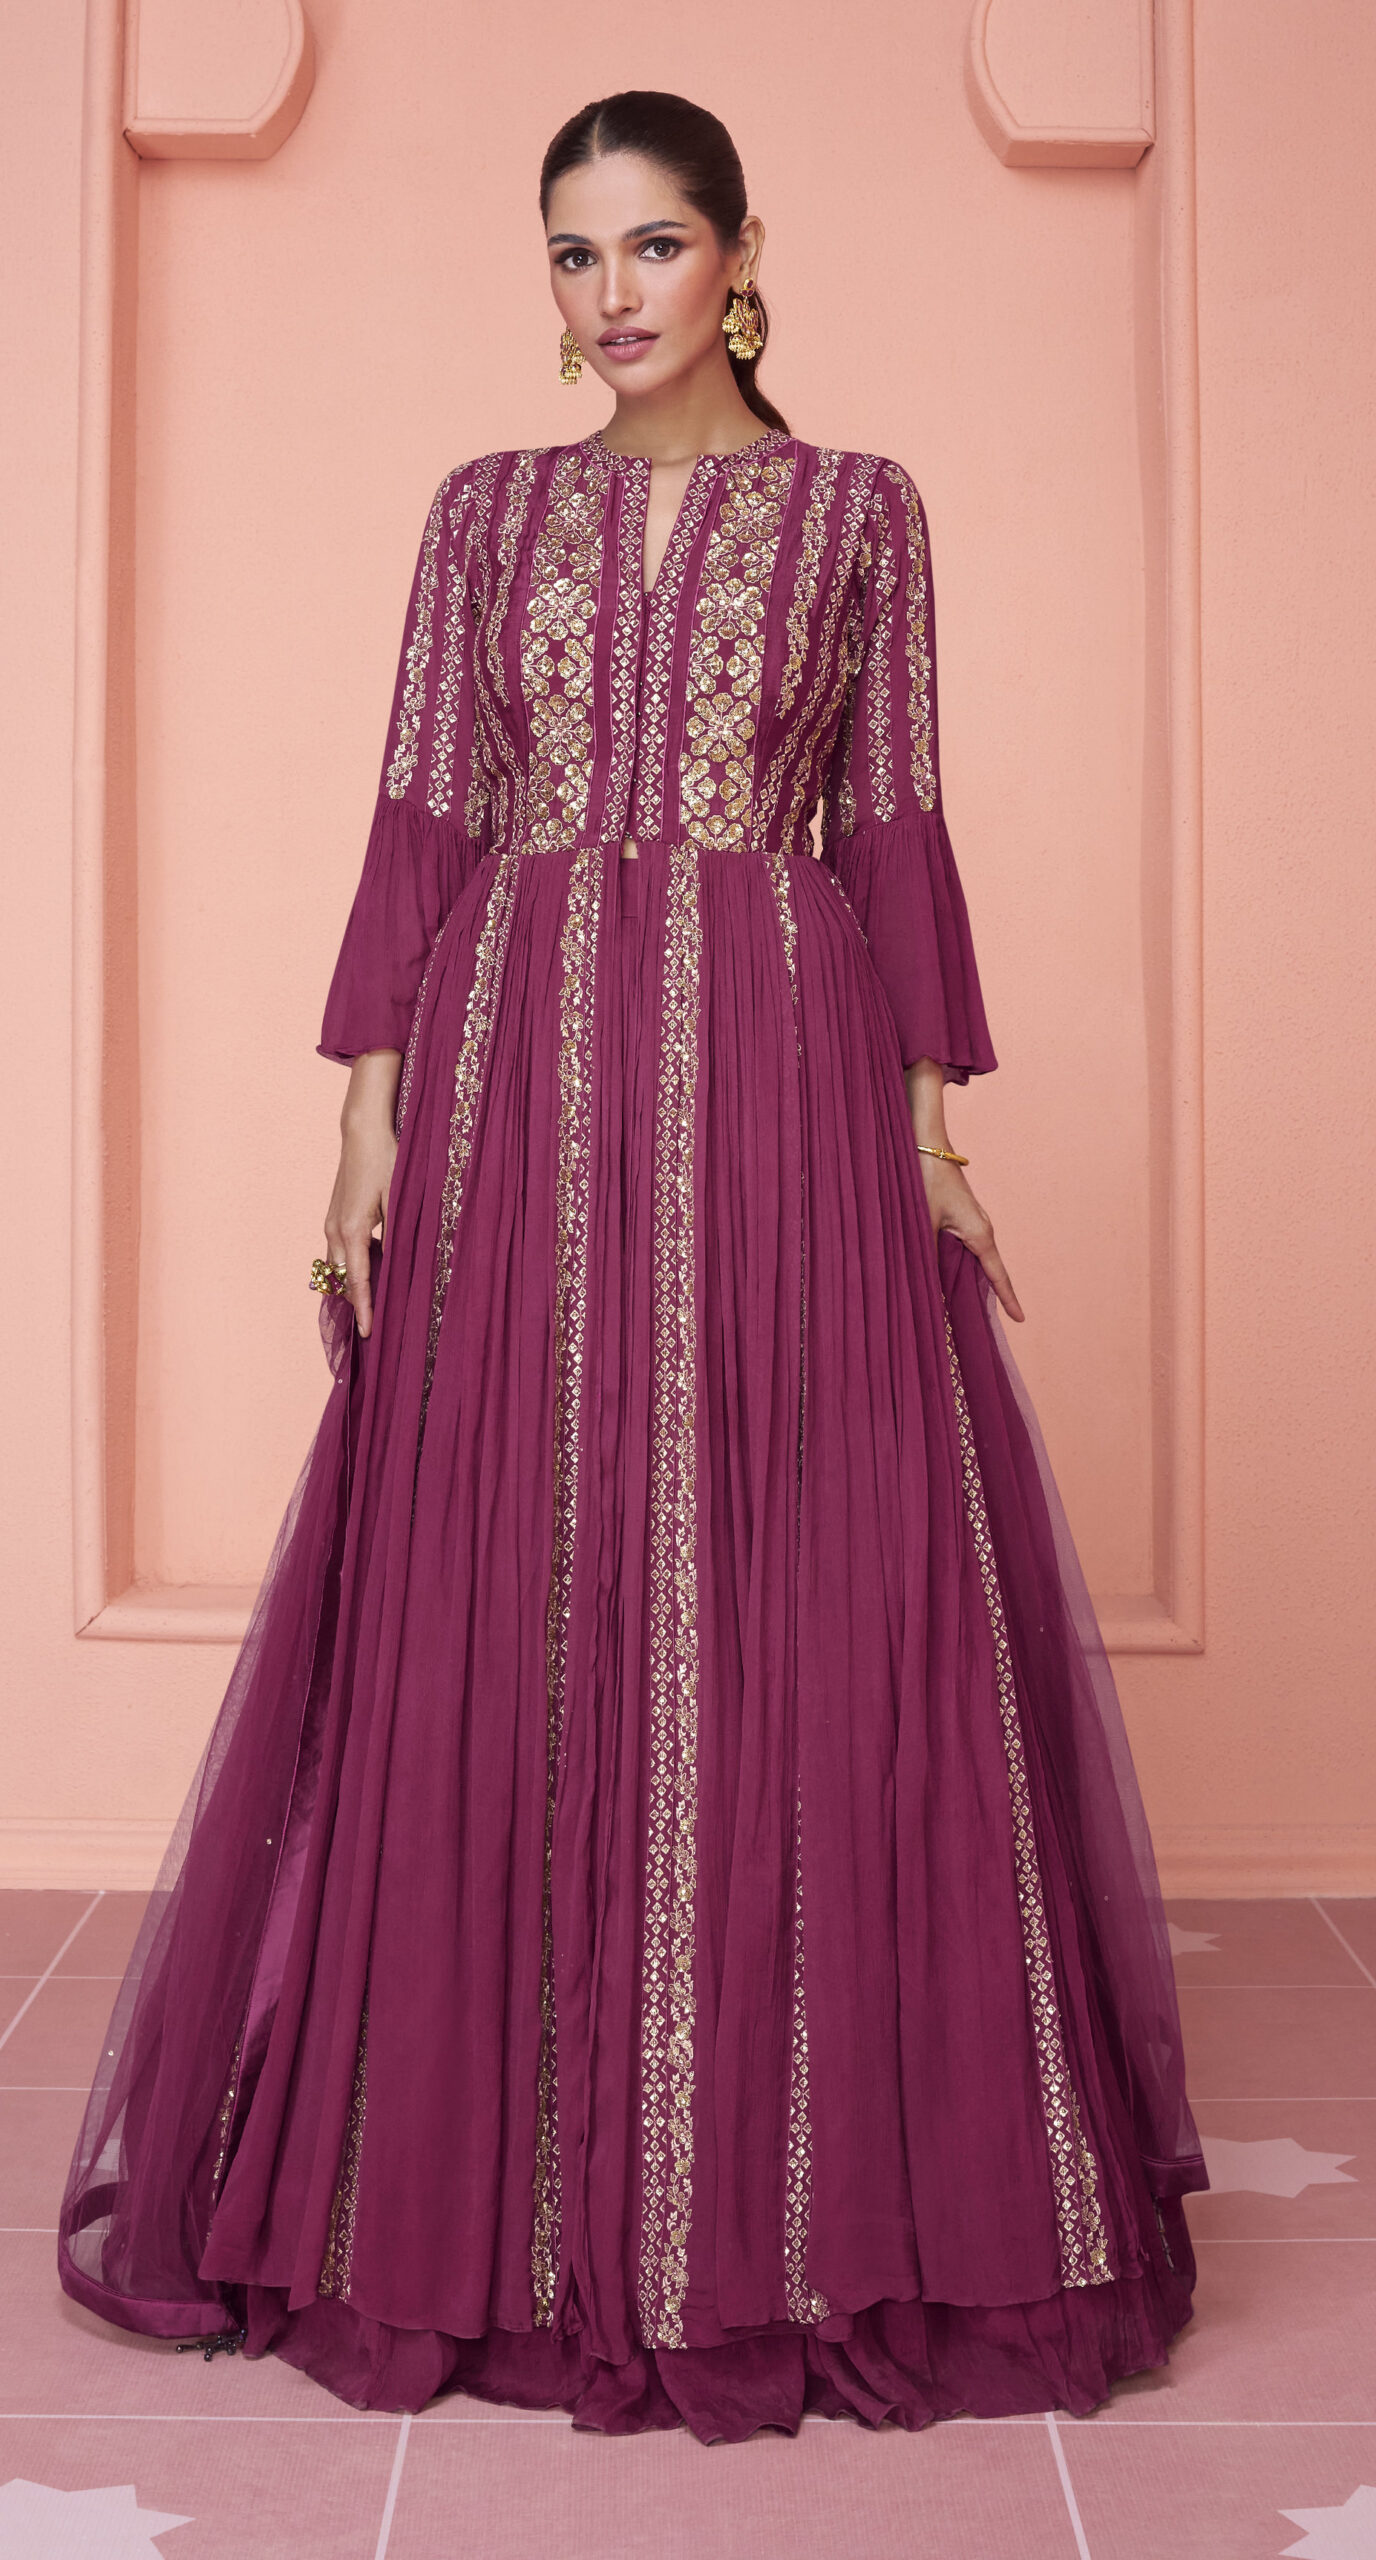 Reception Dress for Indian Bride scaled